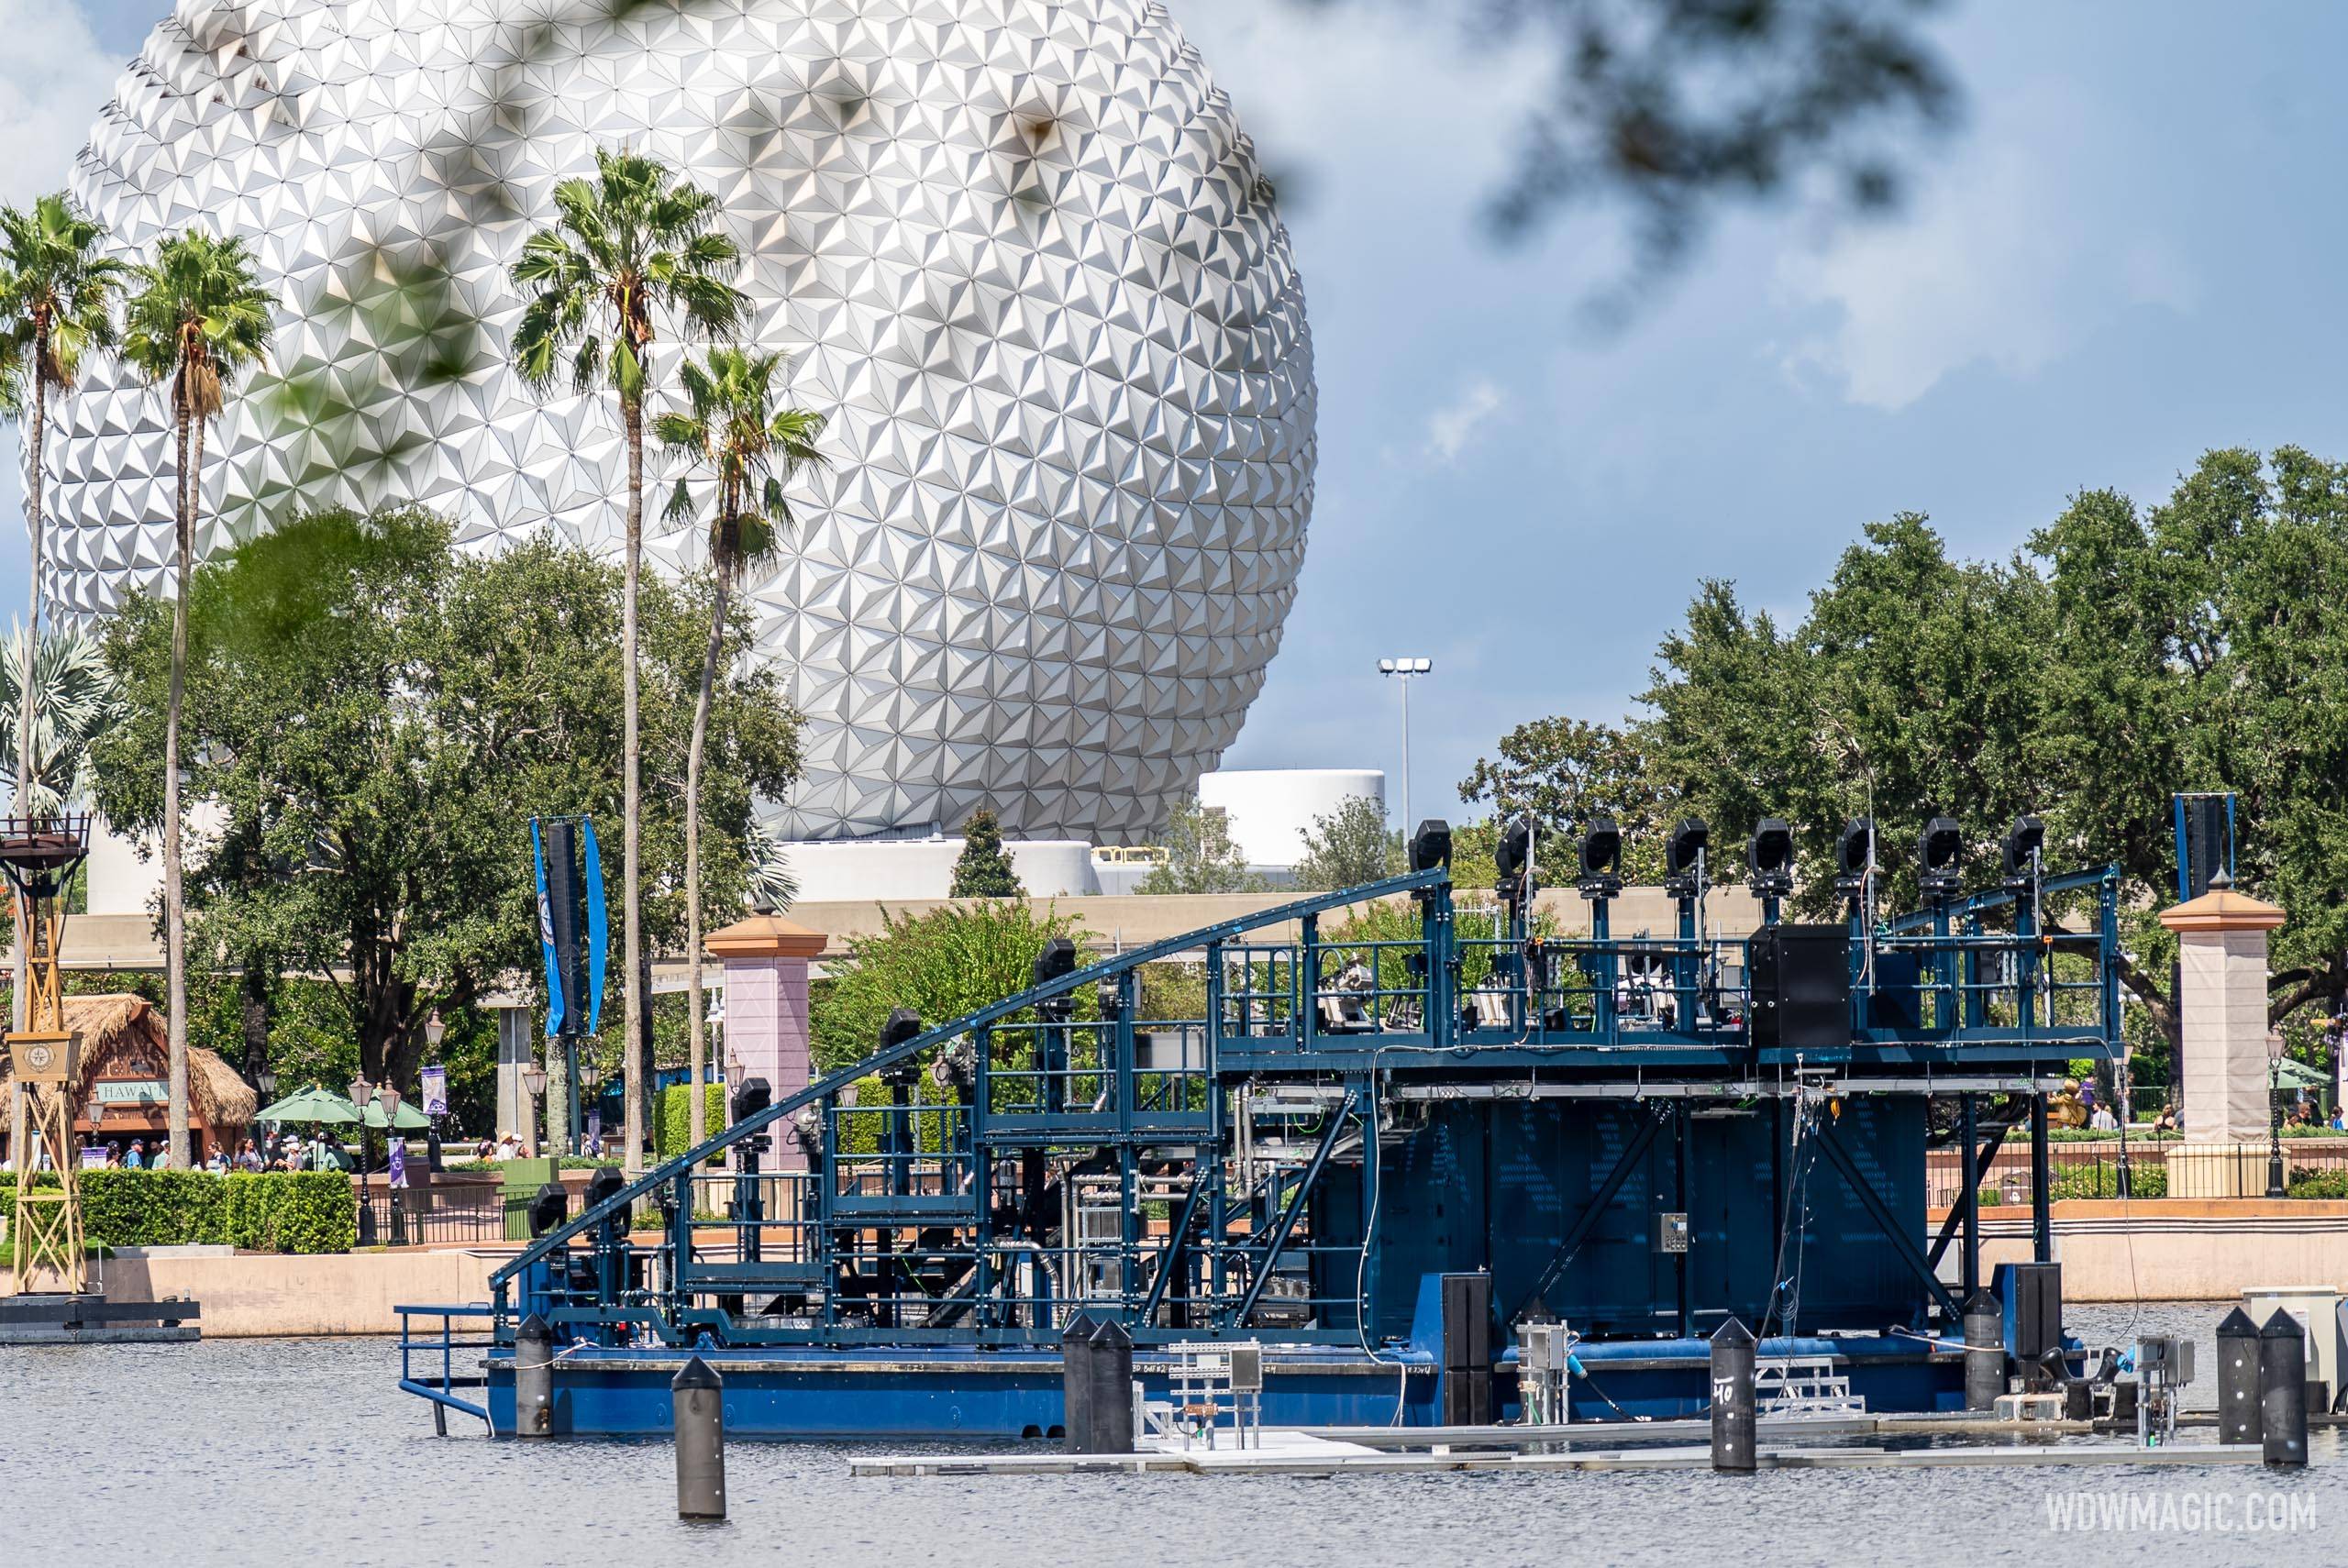 First major piece of Luminous hardware arrives in World Showcase lagoon at EPCOT